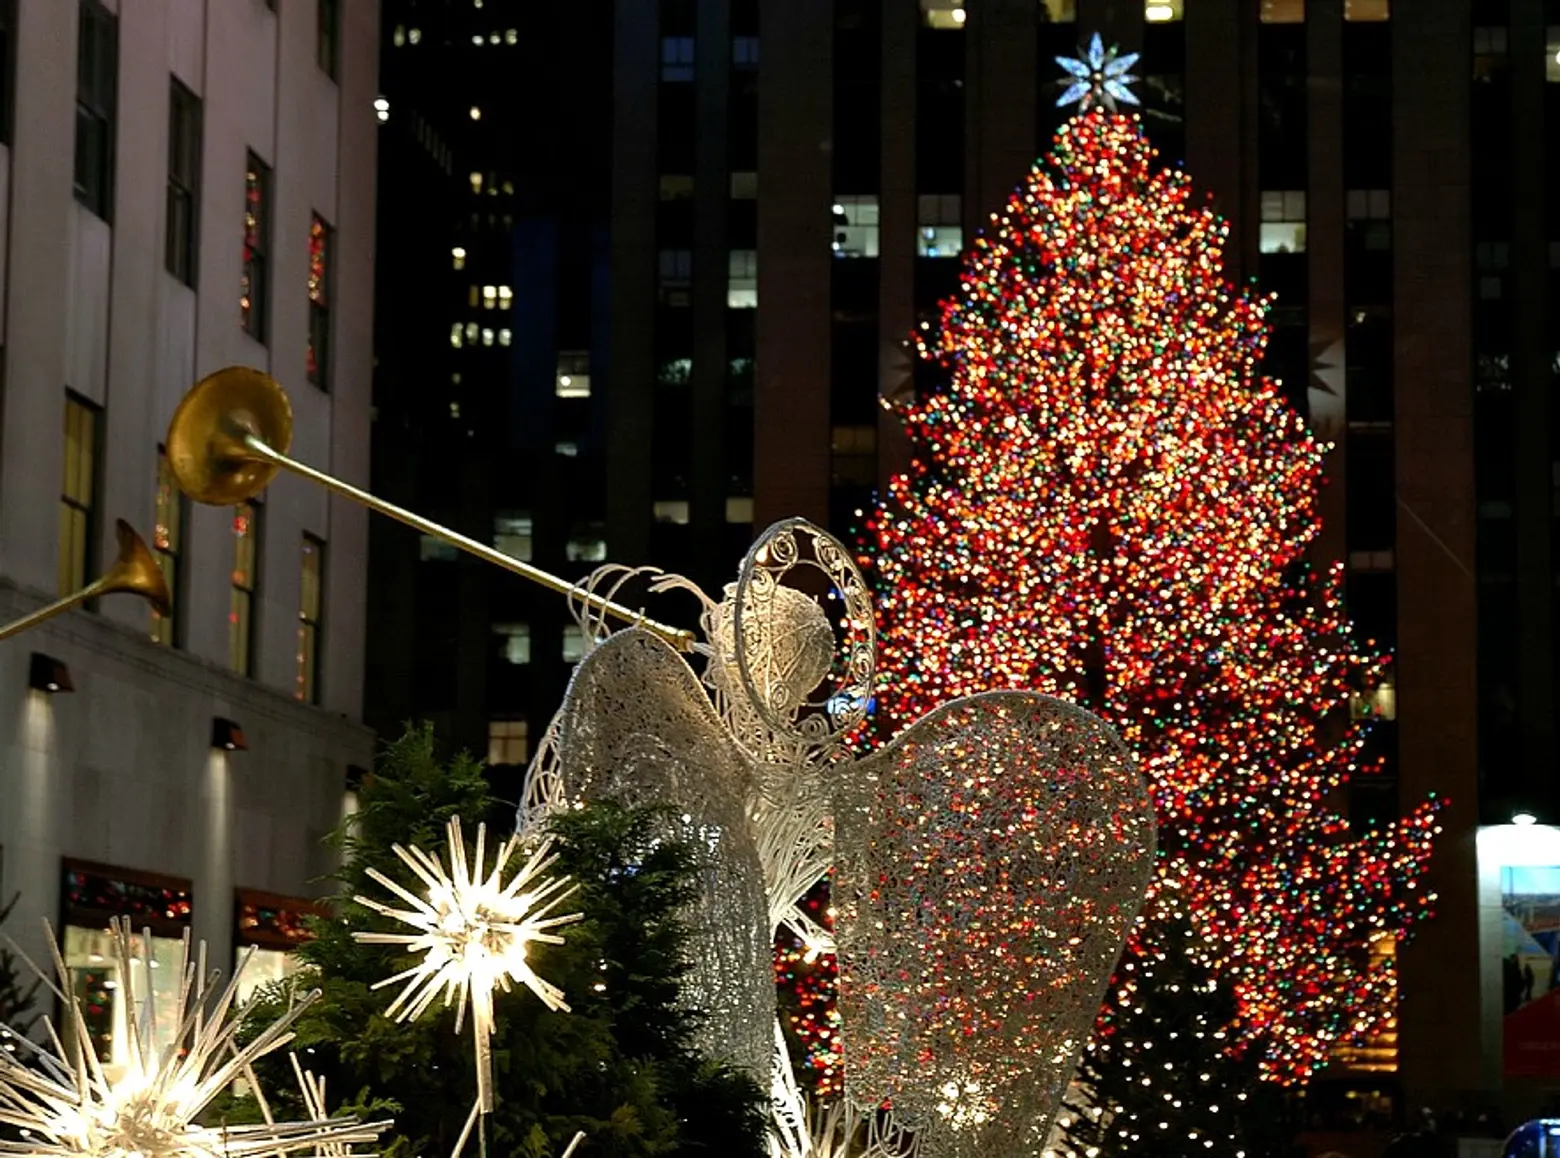 Daily Link Fix: Rockefeller Center Christmas Tree Makes Journey to NYC; Light-Up Loaves of Bread Run on Batteries, Aren’t Edible